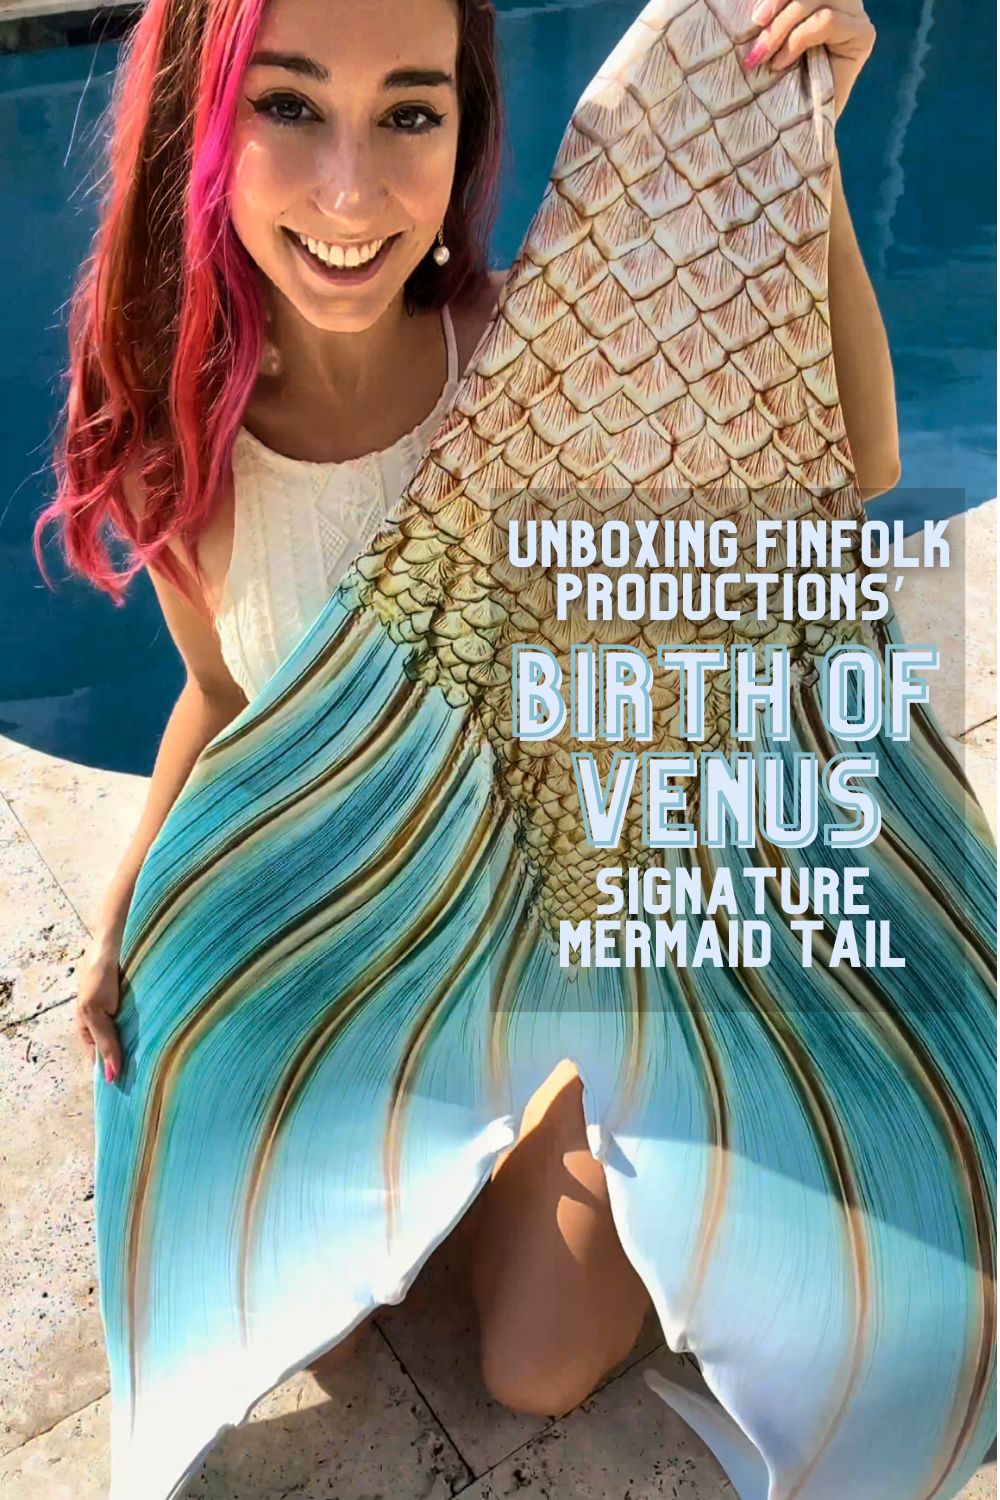 Birth of Venus Mermaid tail by Finfolk Productions - Ambassador Mermaid Jules unboxes this tail in a video and tries it on!